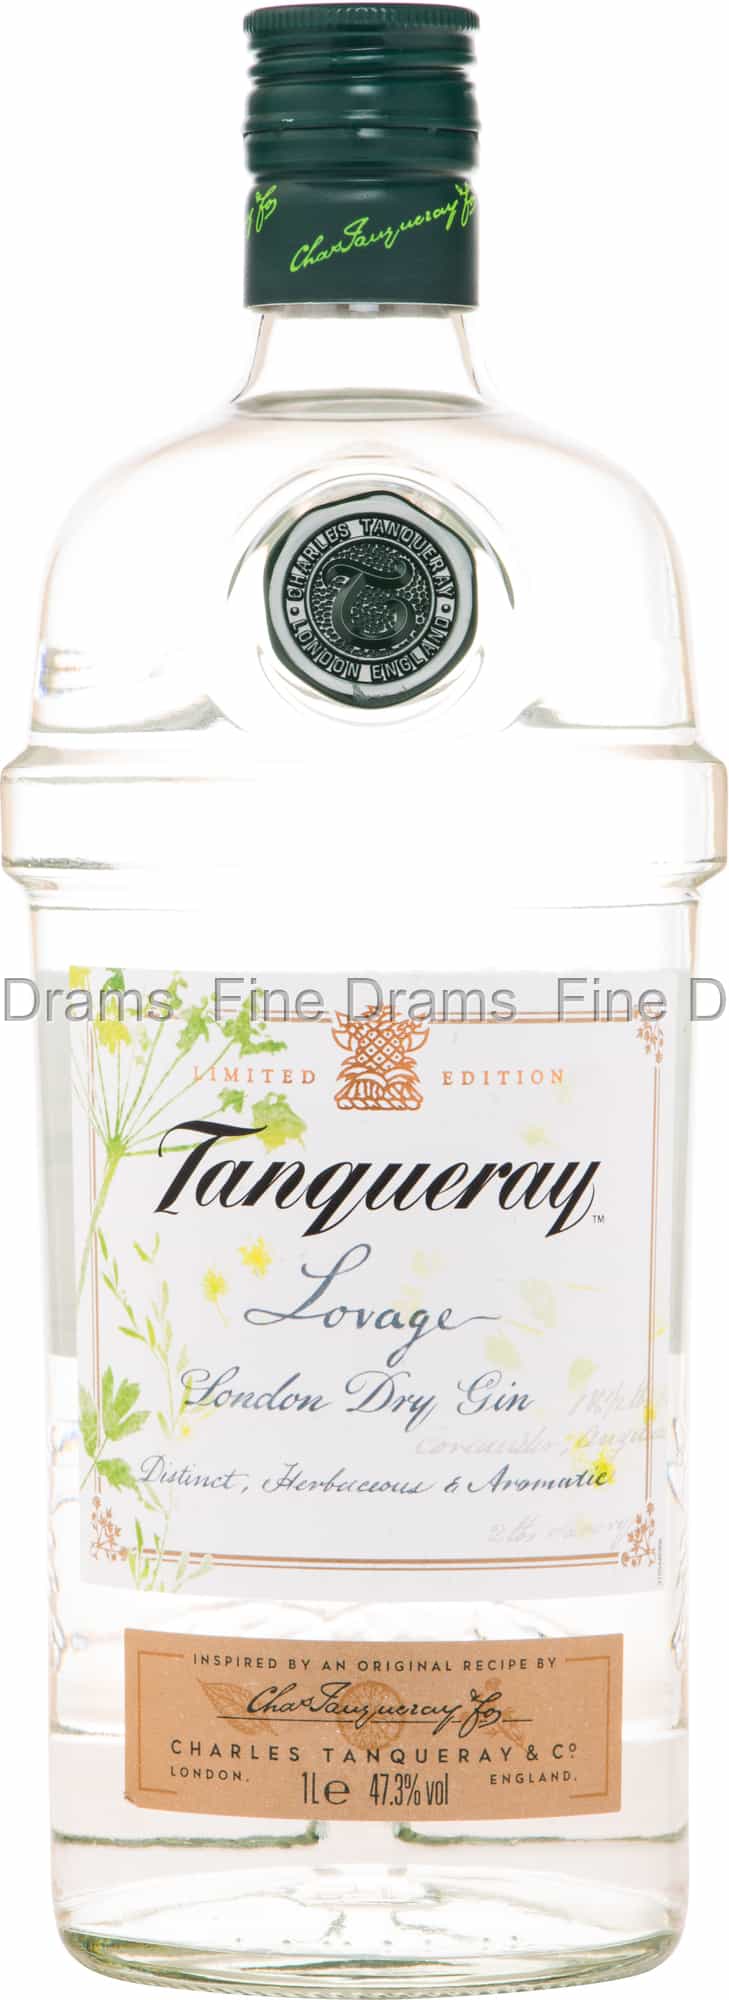 Tanqueray Lovage Gin (1 Liter)